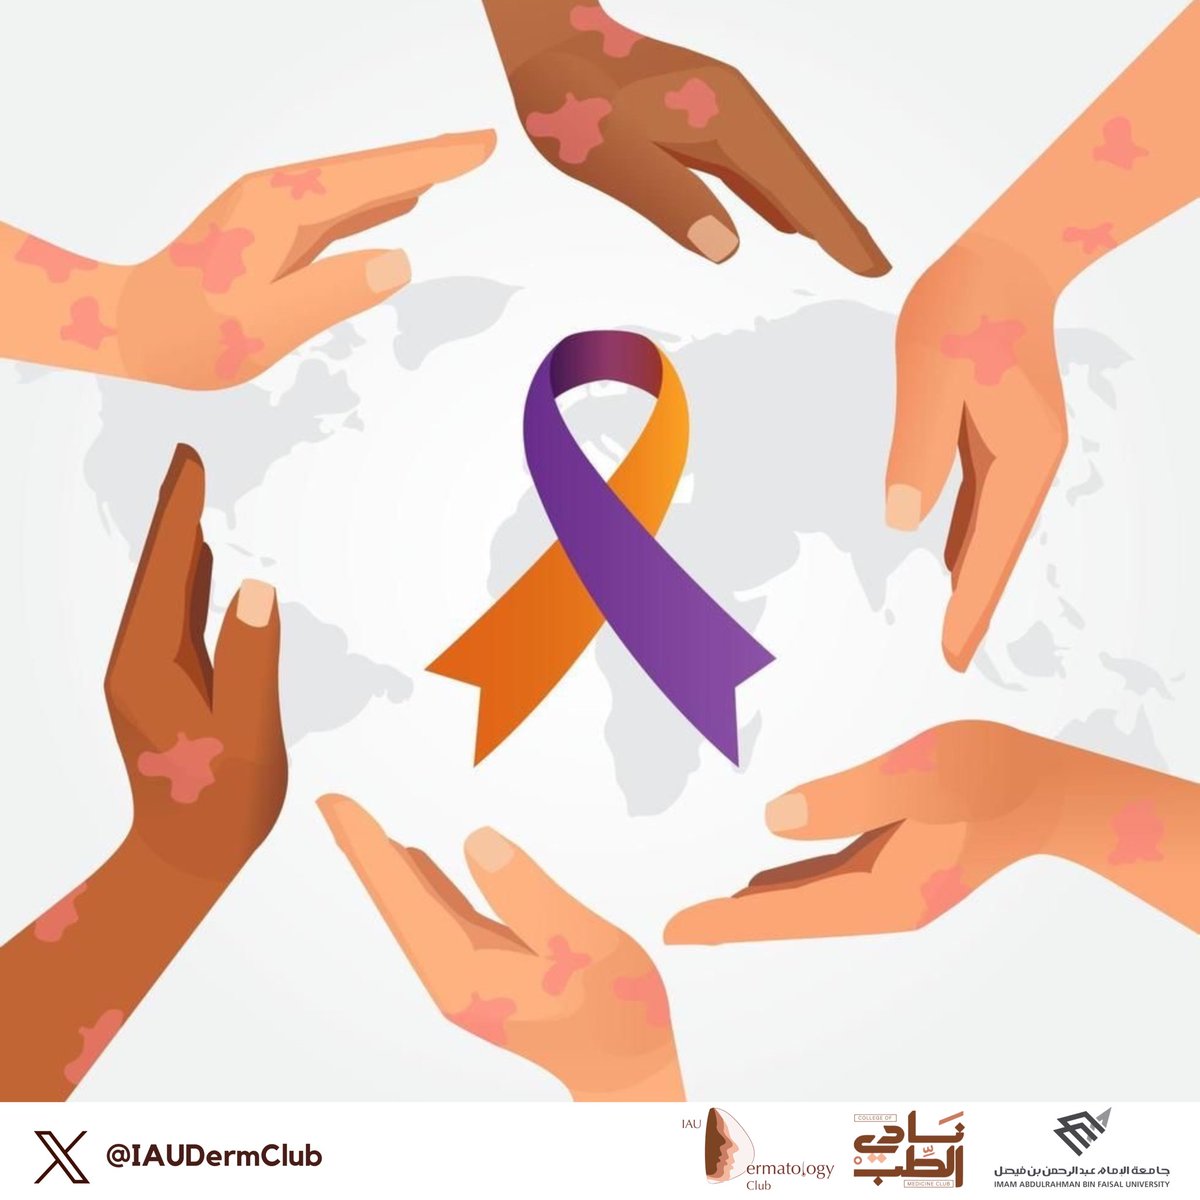 On the 29th of October we come together as a community to raise awareness and show support for those living with psoriasis. Let’s extend our hands in compassion with those who bravely face the challenges of psoriasis every day.

#WorldPsoriasisDay